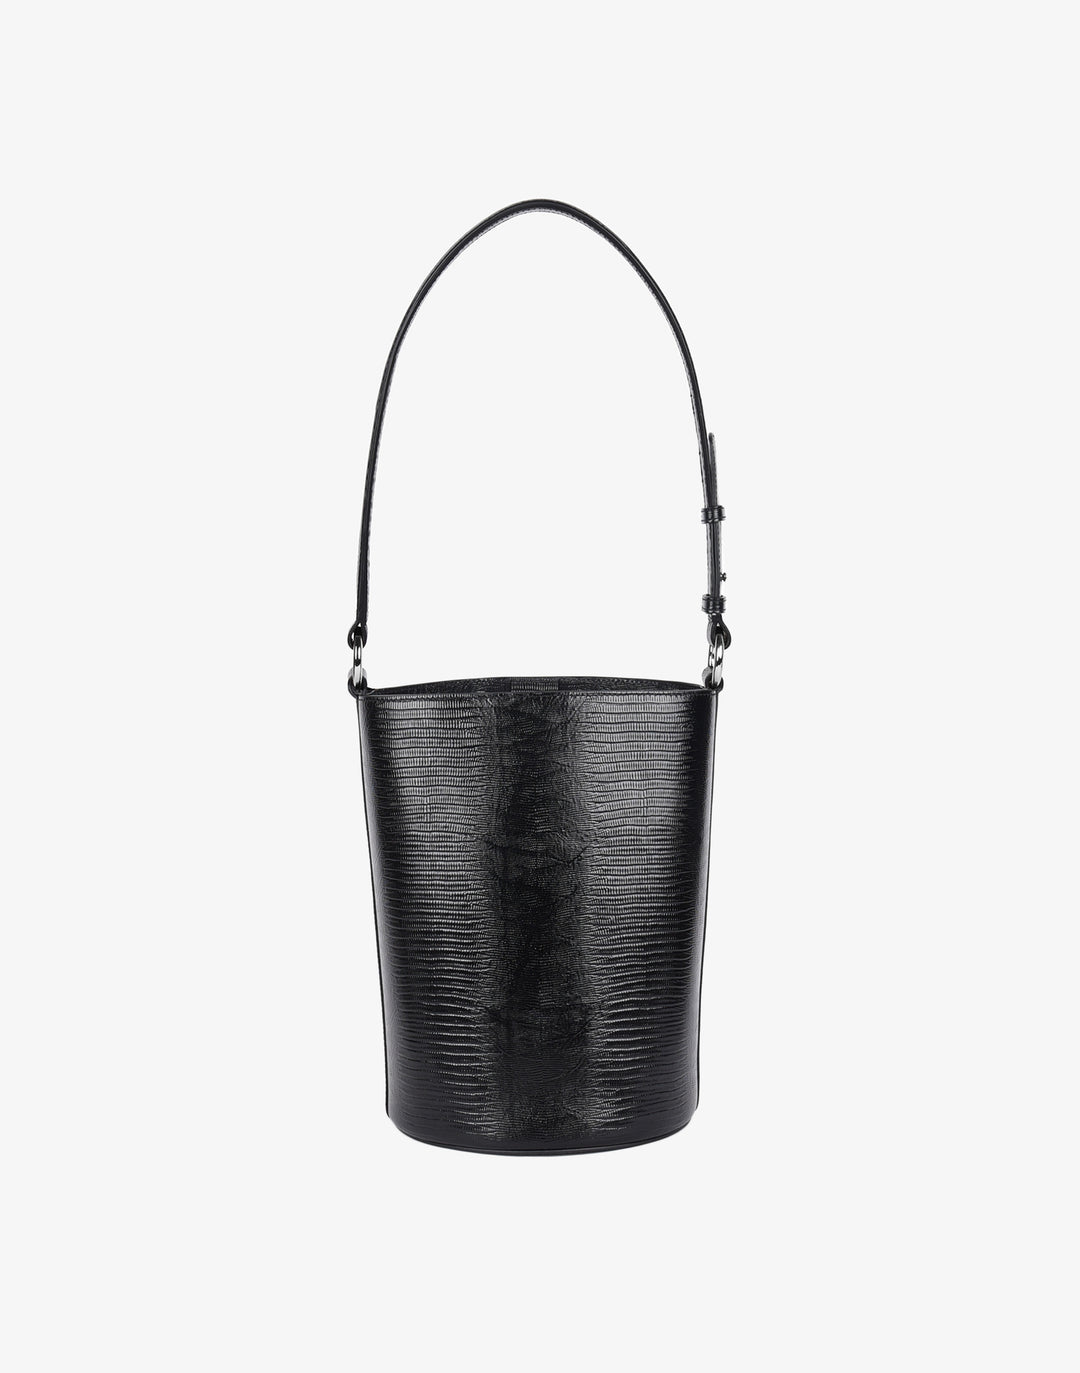 Hyer Goods_upcycled leather_Convertible Bucket Bag_Black lizard#color_black-lizard